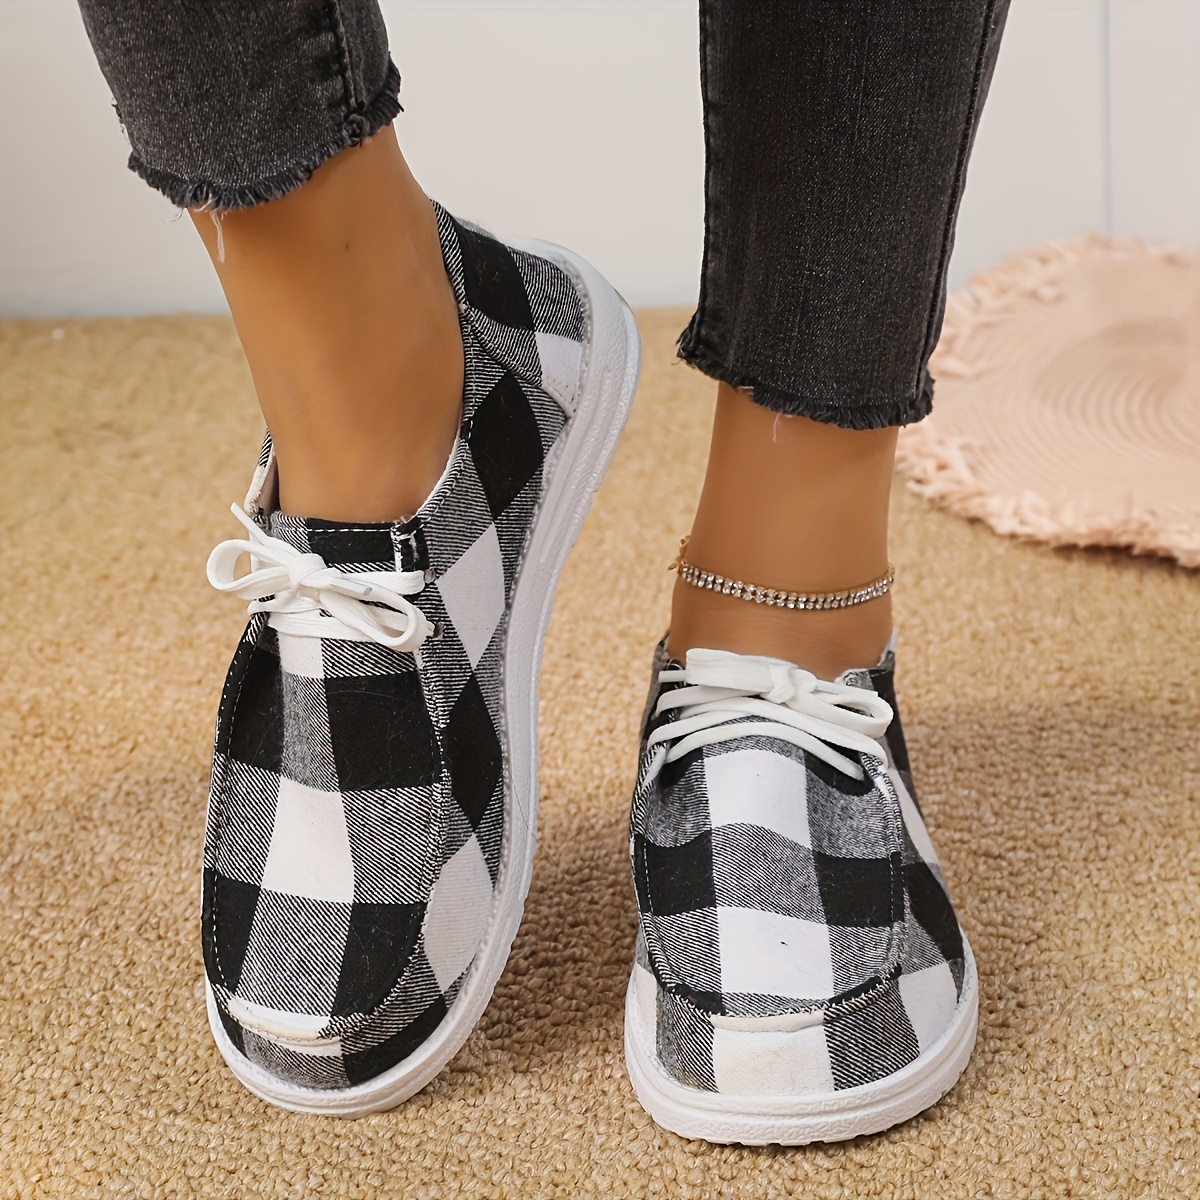 Cycle-Topshop Buffalo Plaid Slip On Shoes Flat Sole Lace Up Casual Canvas  Shoes For Women Christmas New 